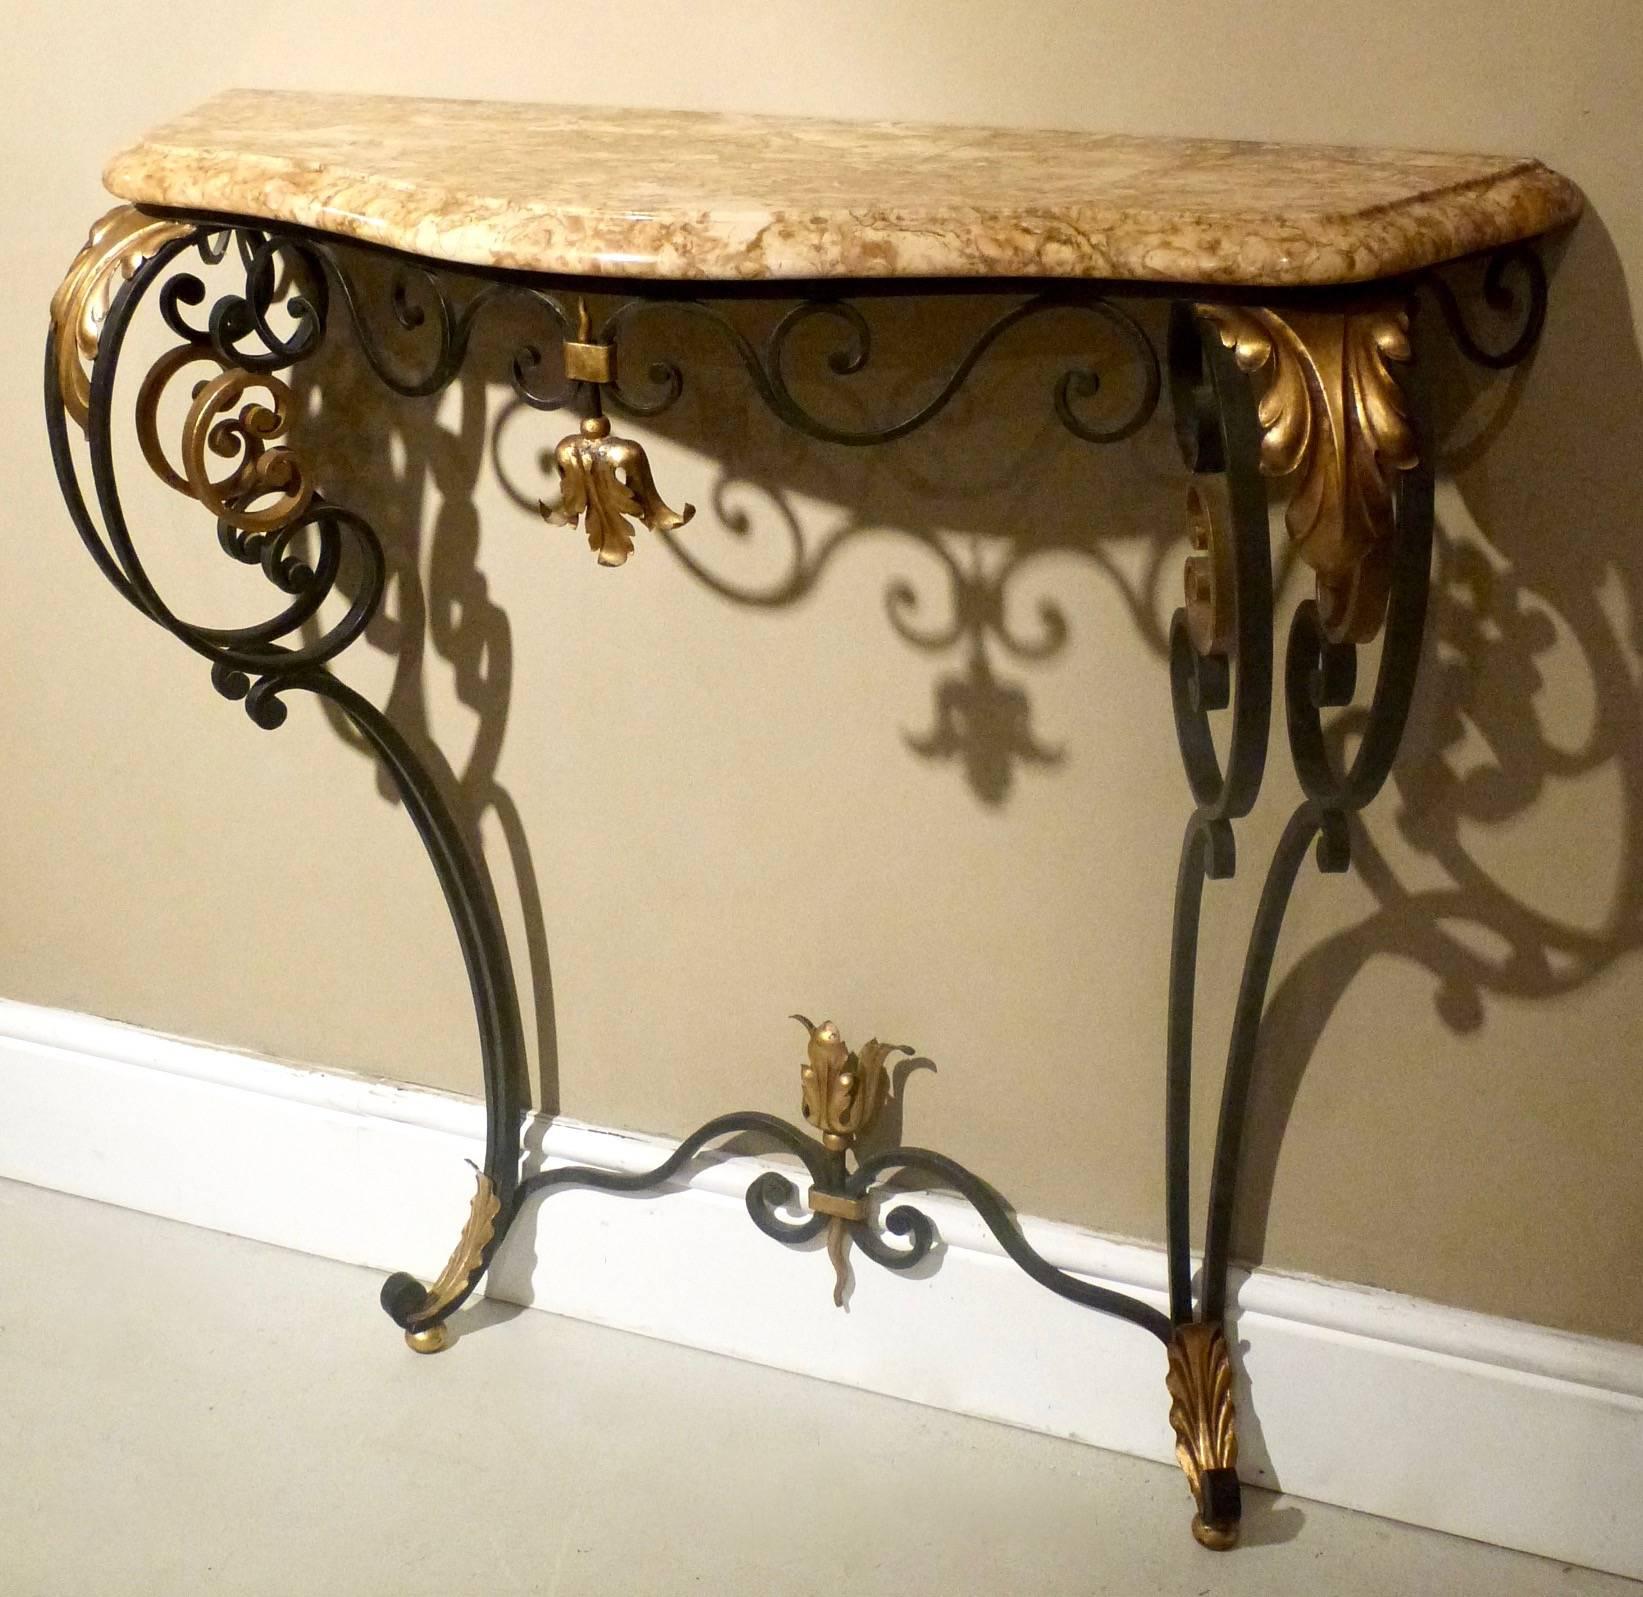 A pair of early to mid-20th century French wrought iron console tables with serpentine marble tops.